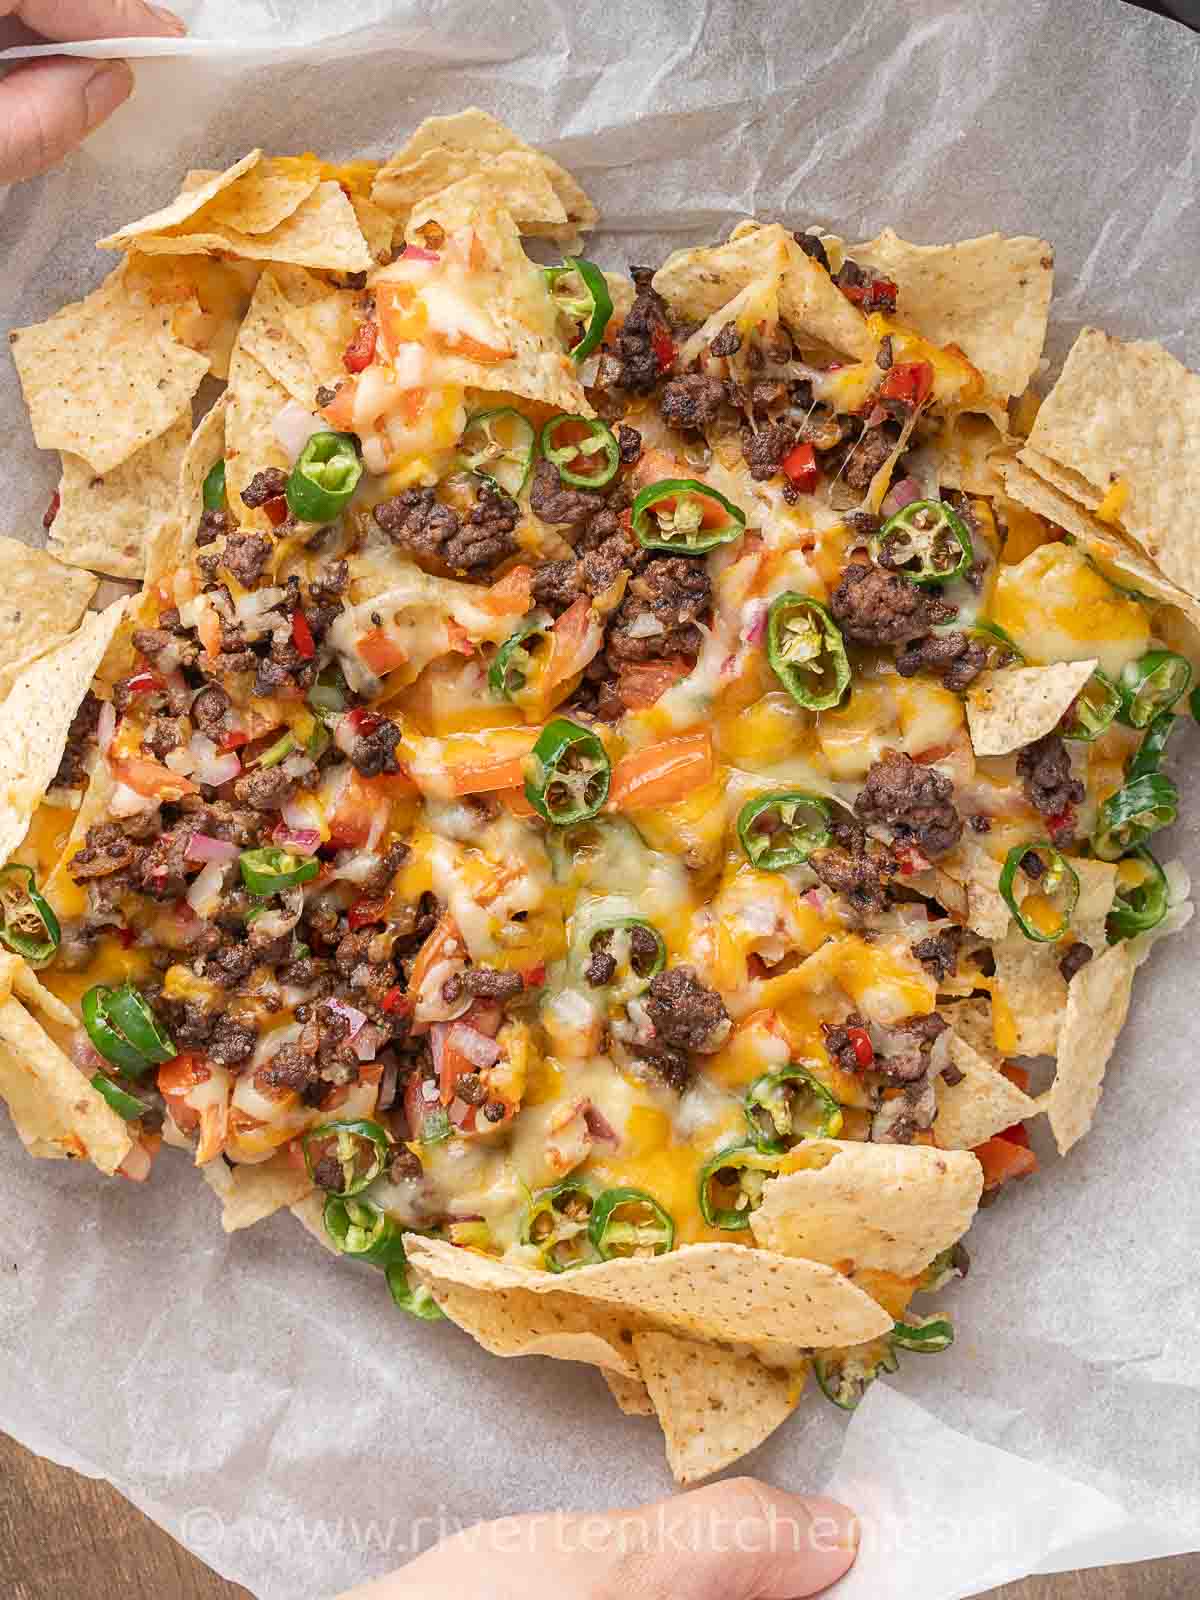 ground beef nachos with melted cheese, salsa, and jalapenos cooked in an air fryer.